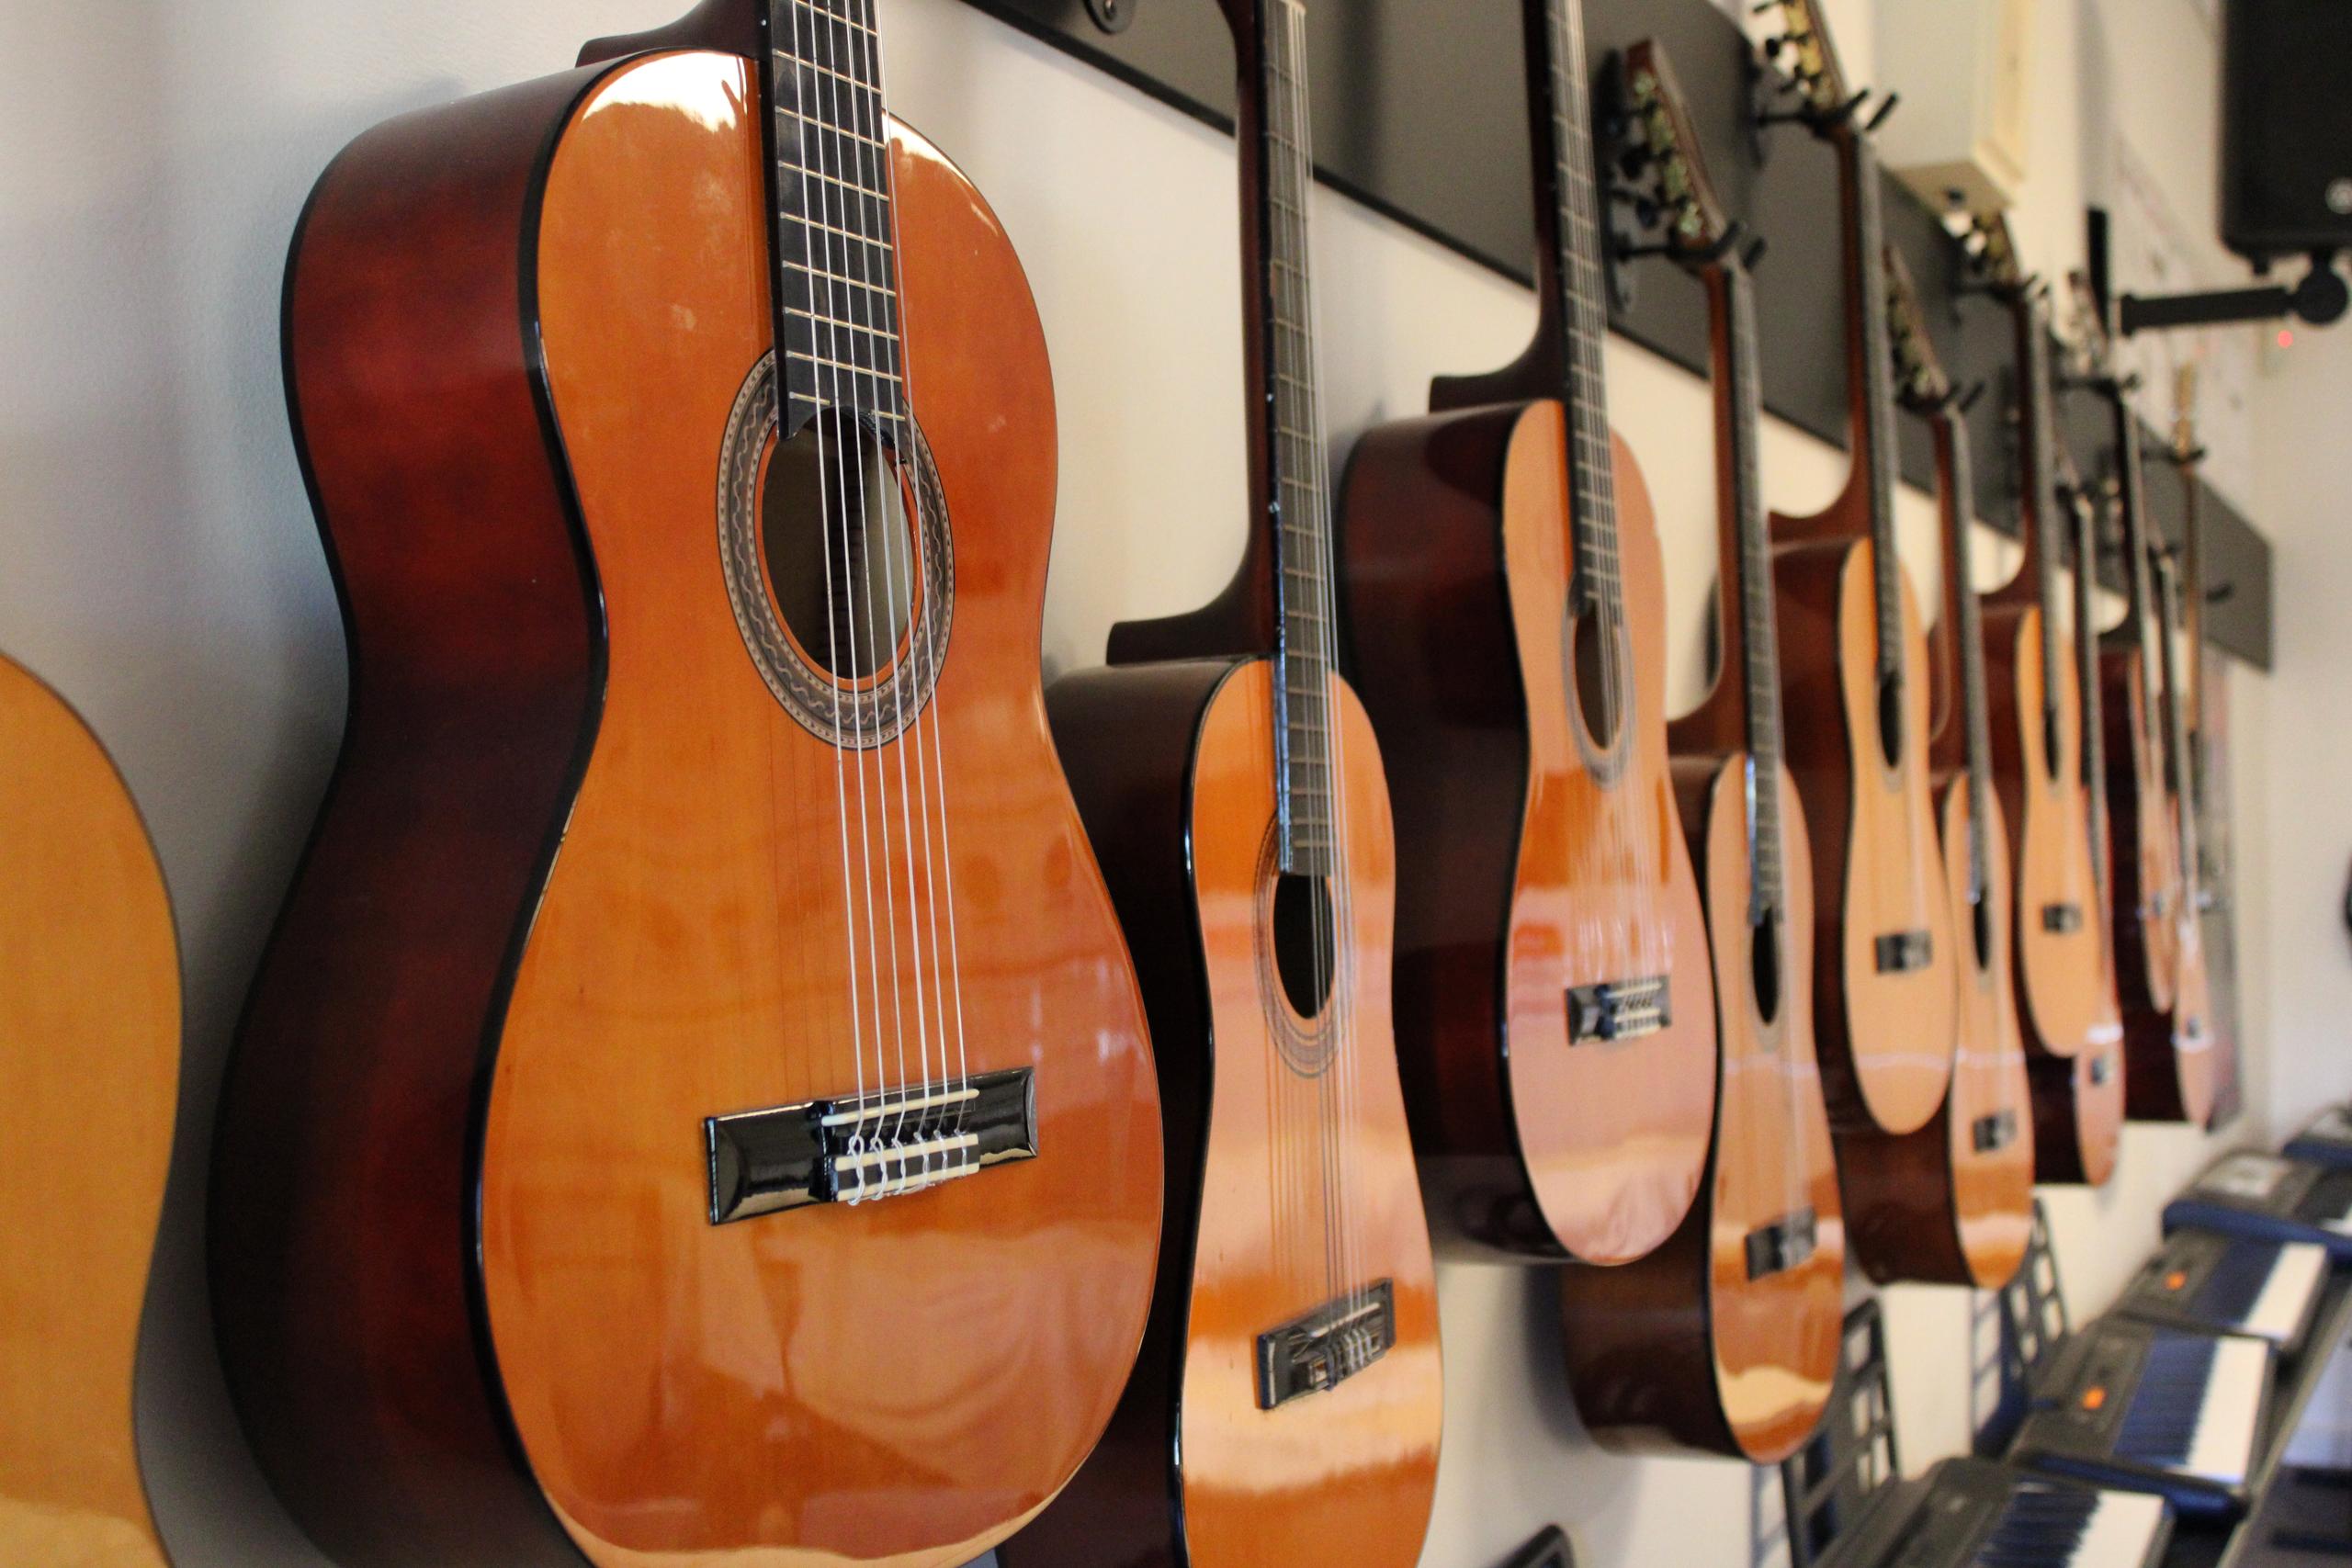 Acoustic guitars hanging on the wall within the music room.